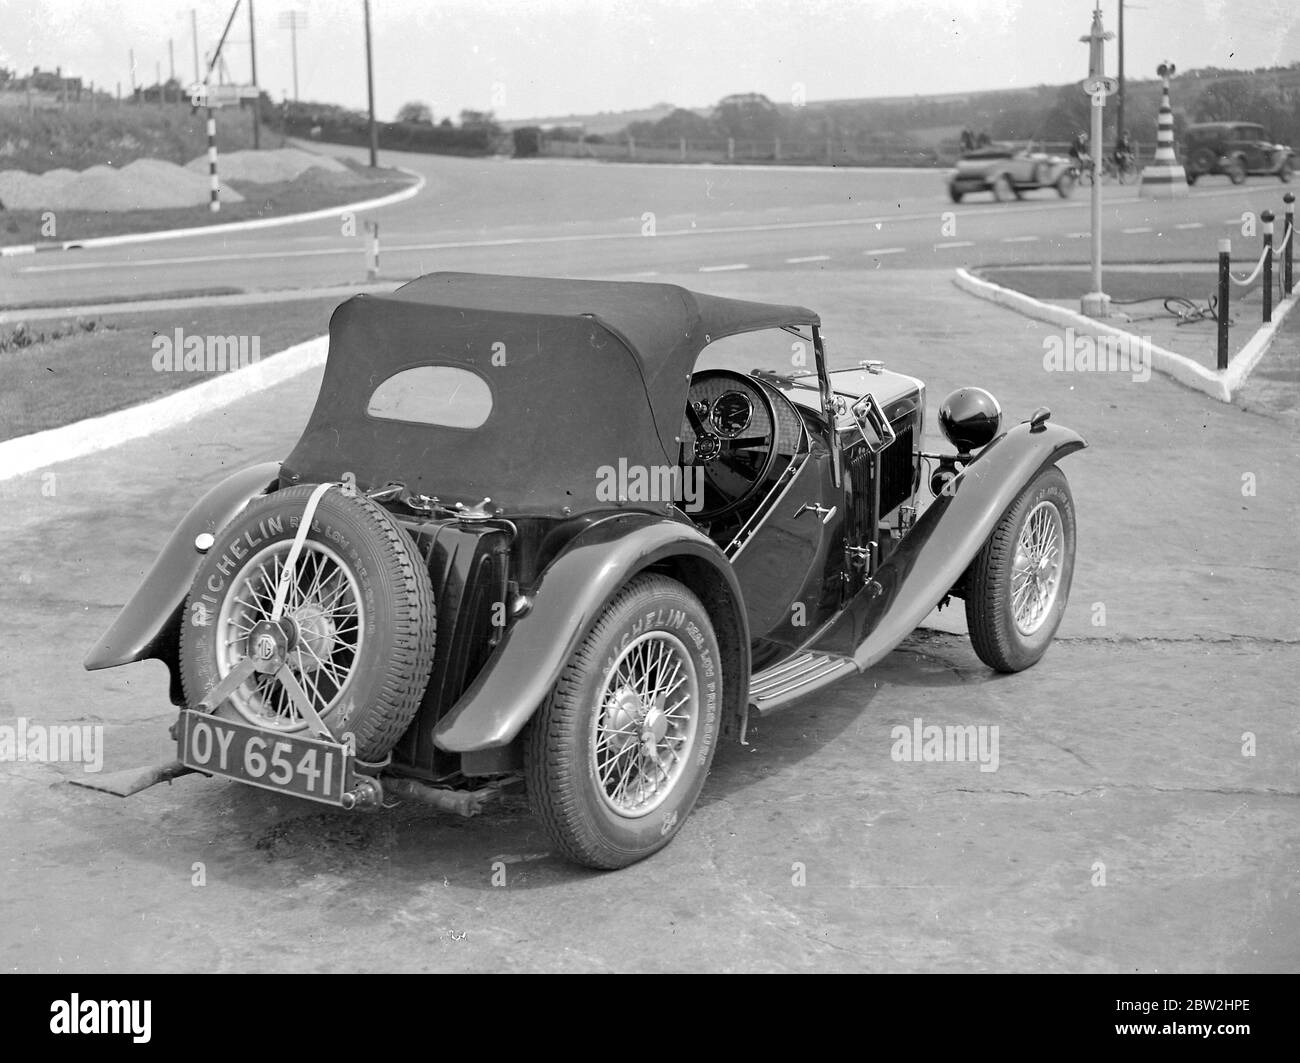 1934 Mg High Resolution Stock Photography and Images - Alamy